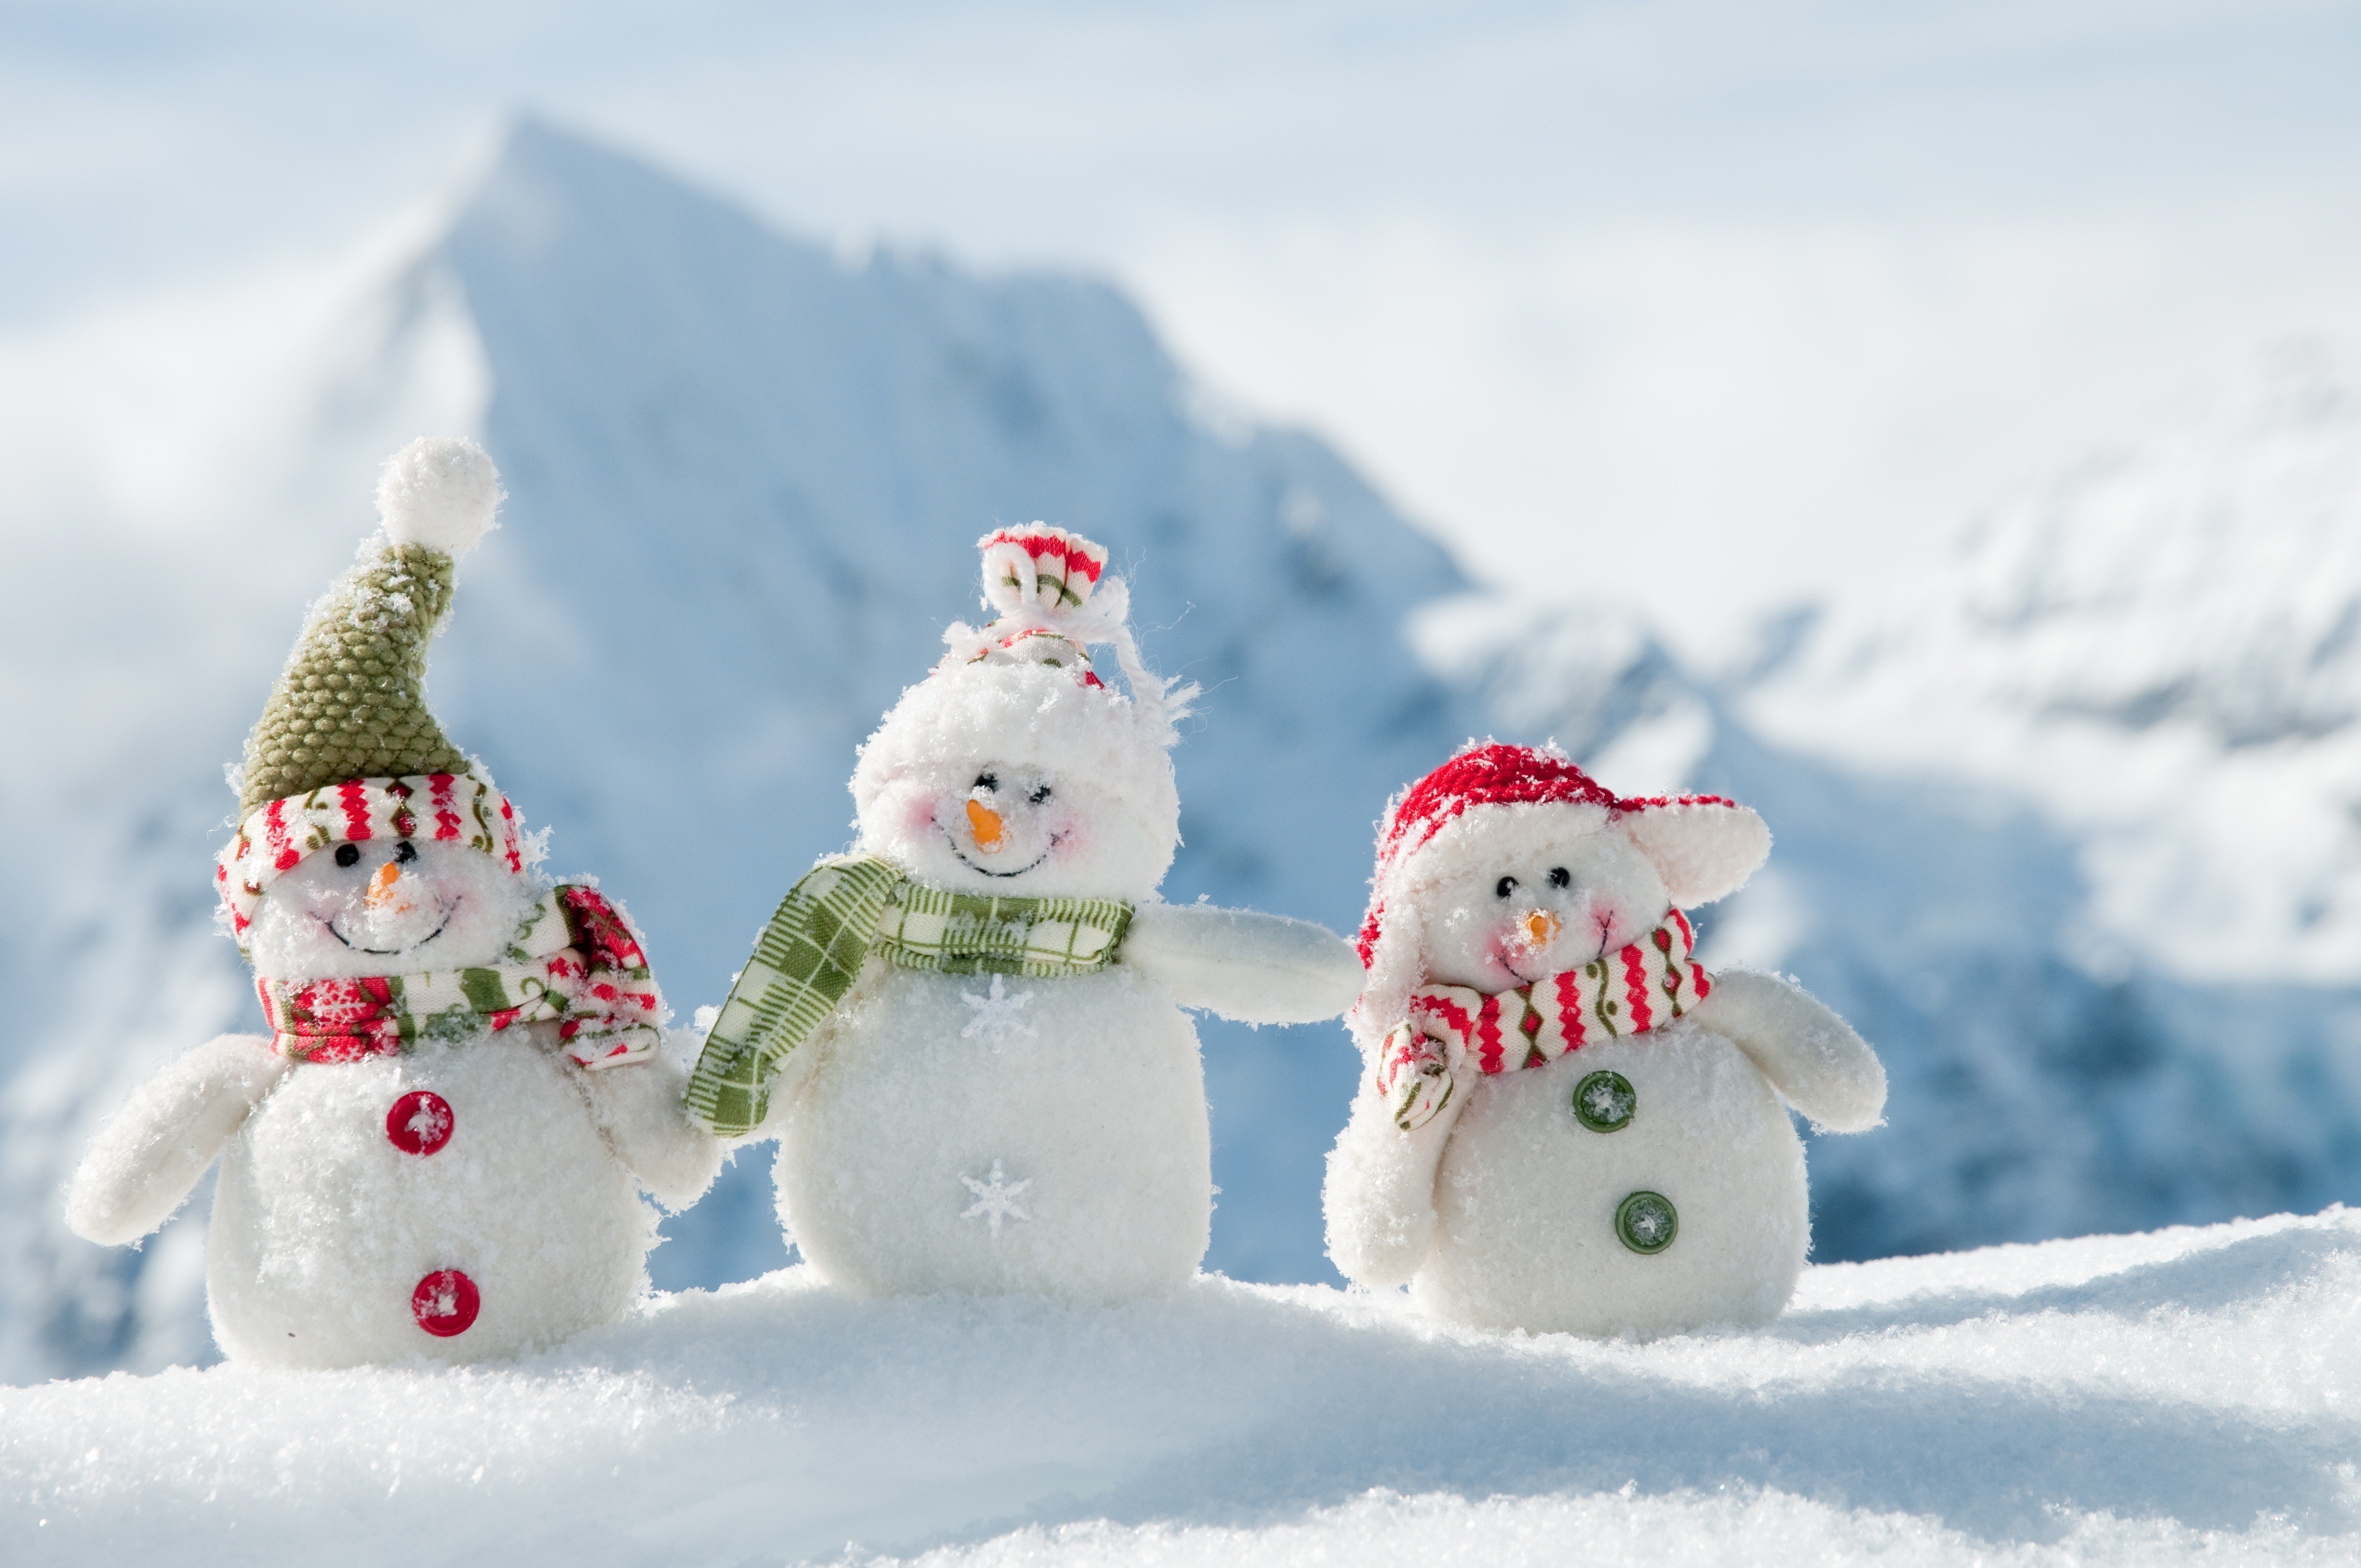 Snowy Toys Gift on Christmas Holiday HD Wallpaper HD Wallpapers